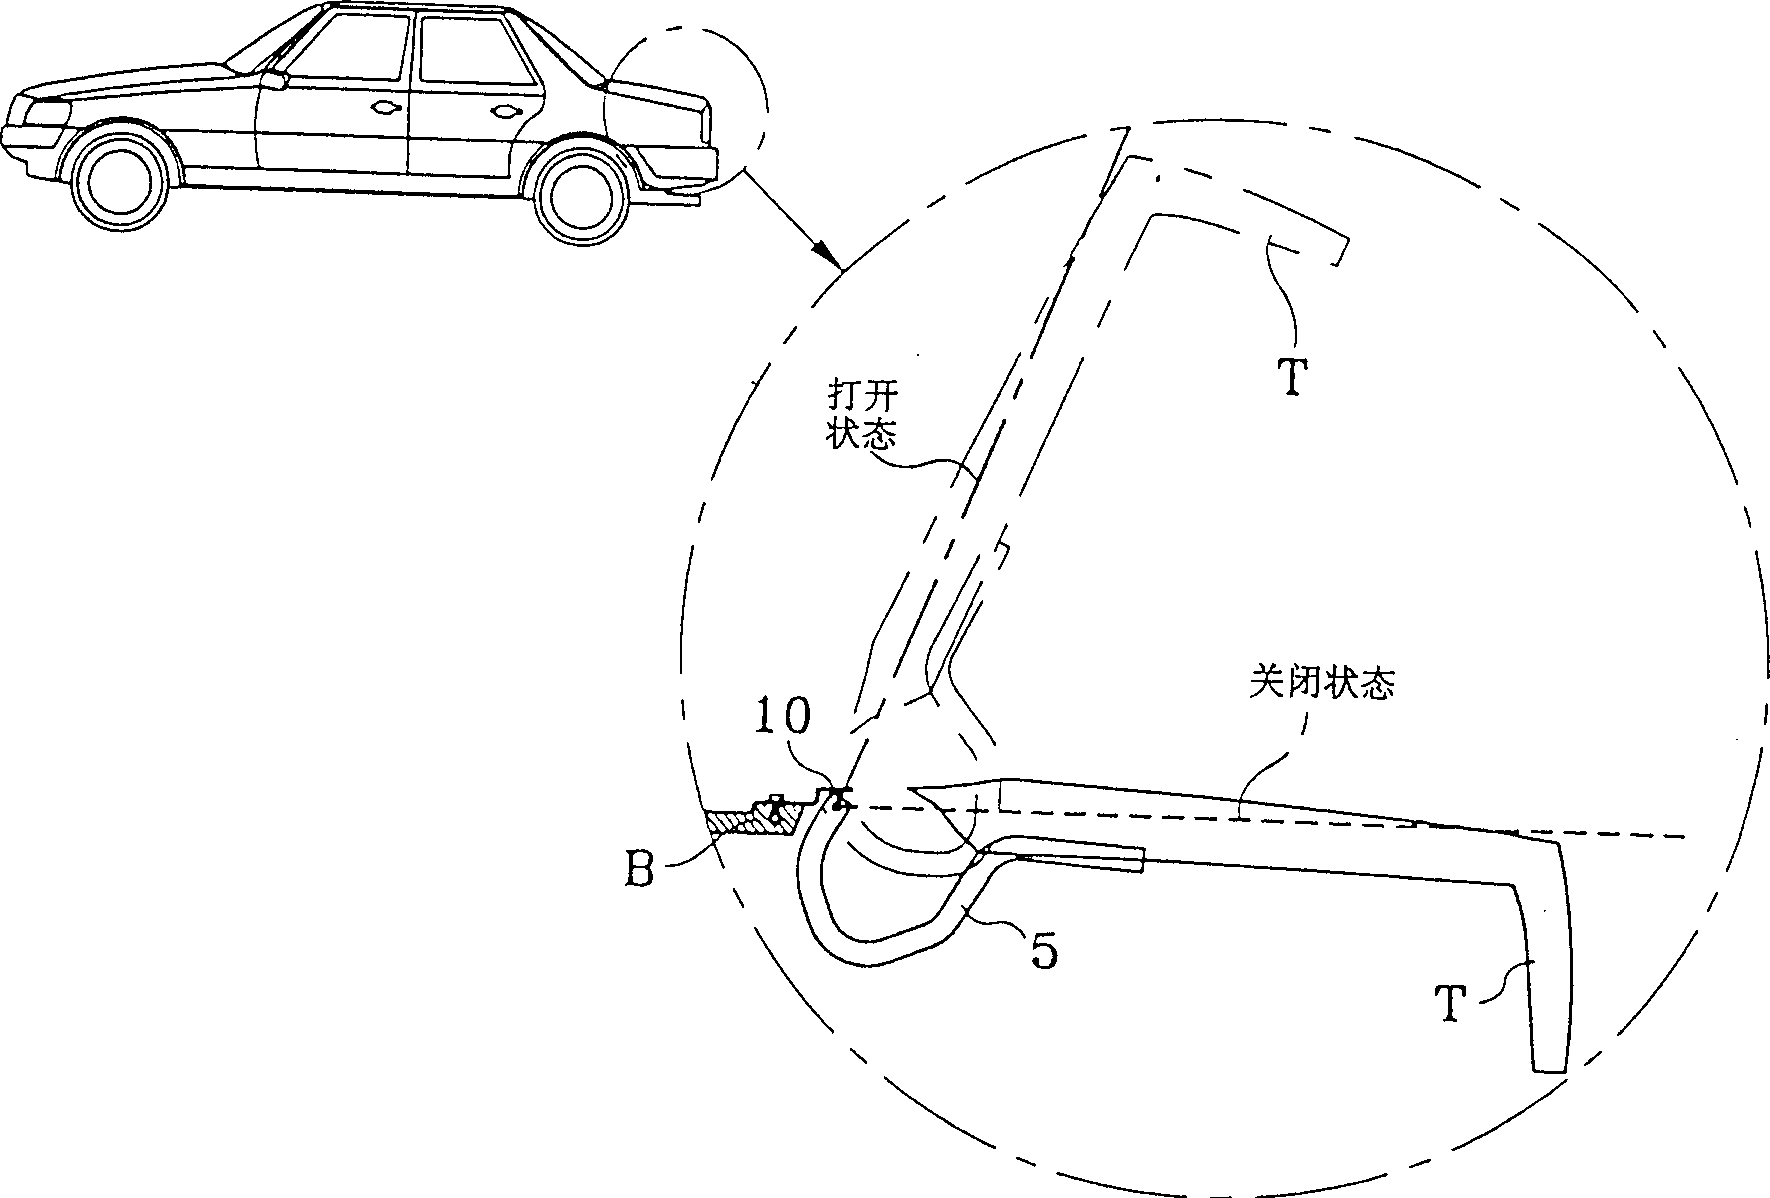 Support device for boot space tailgate of automobile